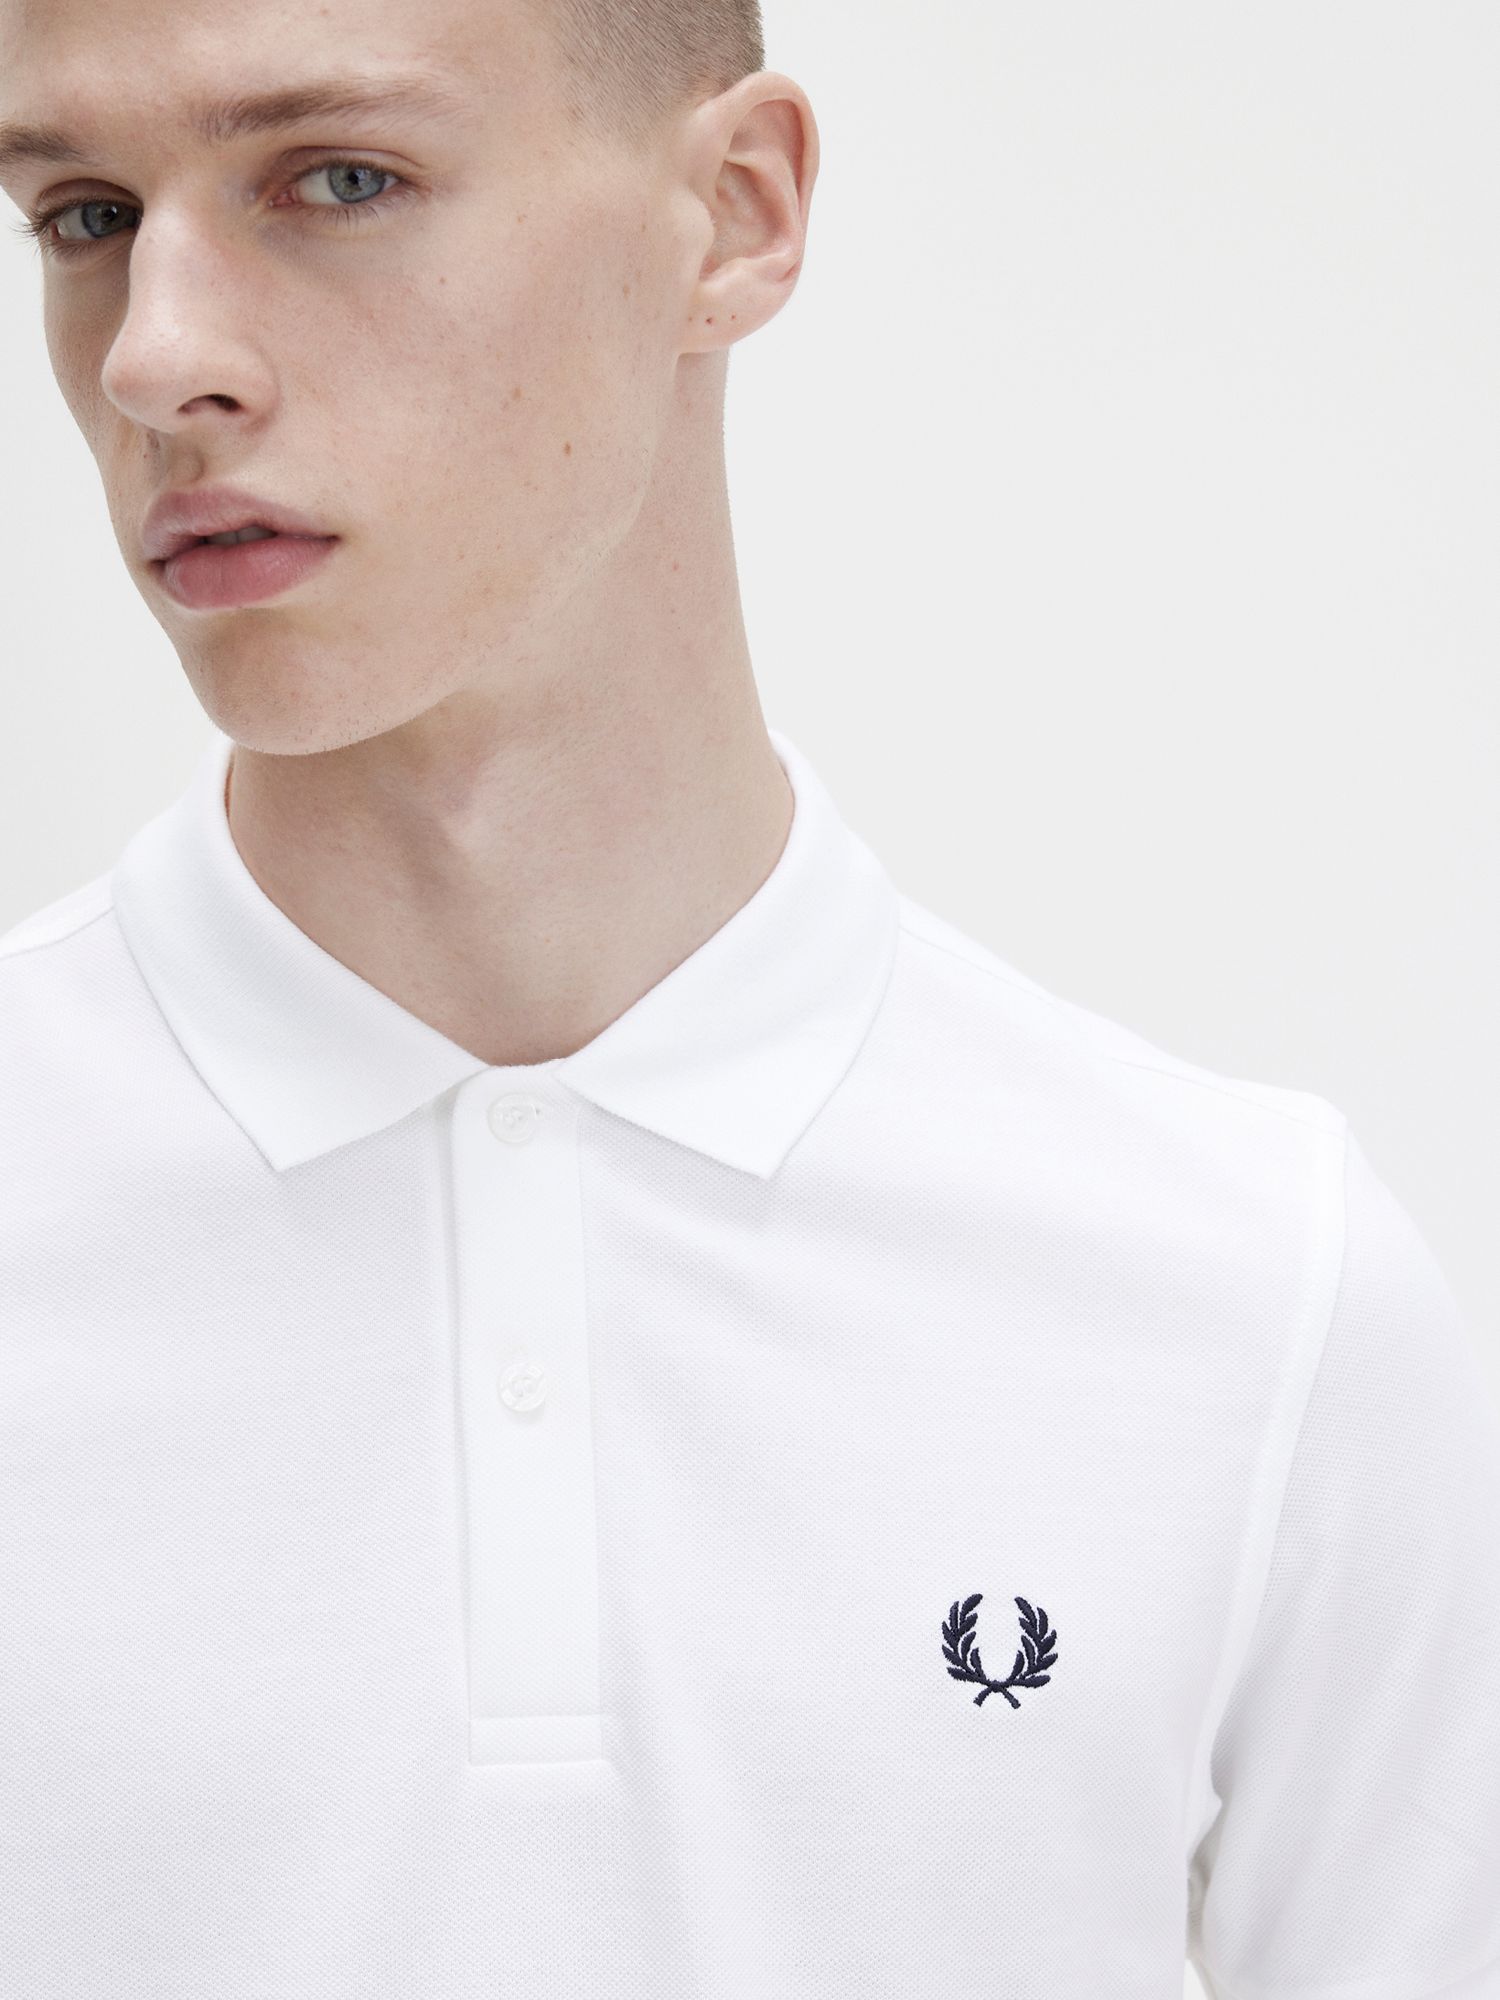 Fred Perry Plain Regular Fit Polo Shirt, White at John Lewis & Partners